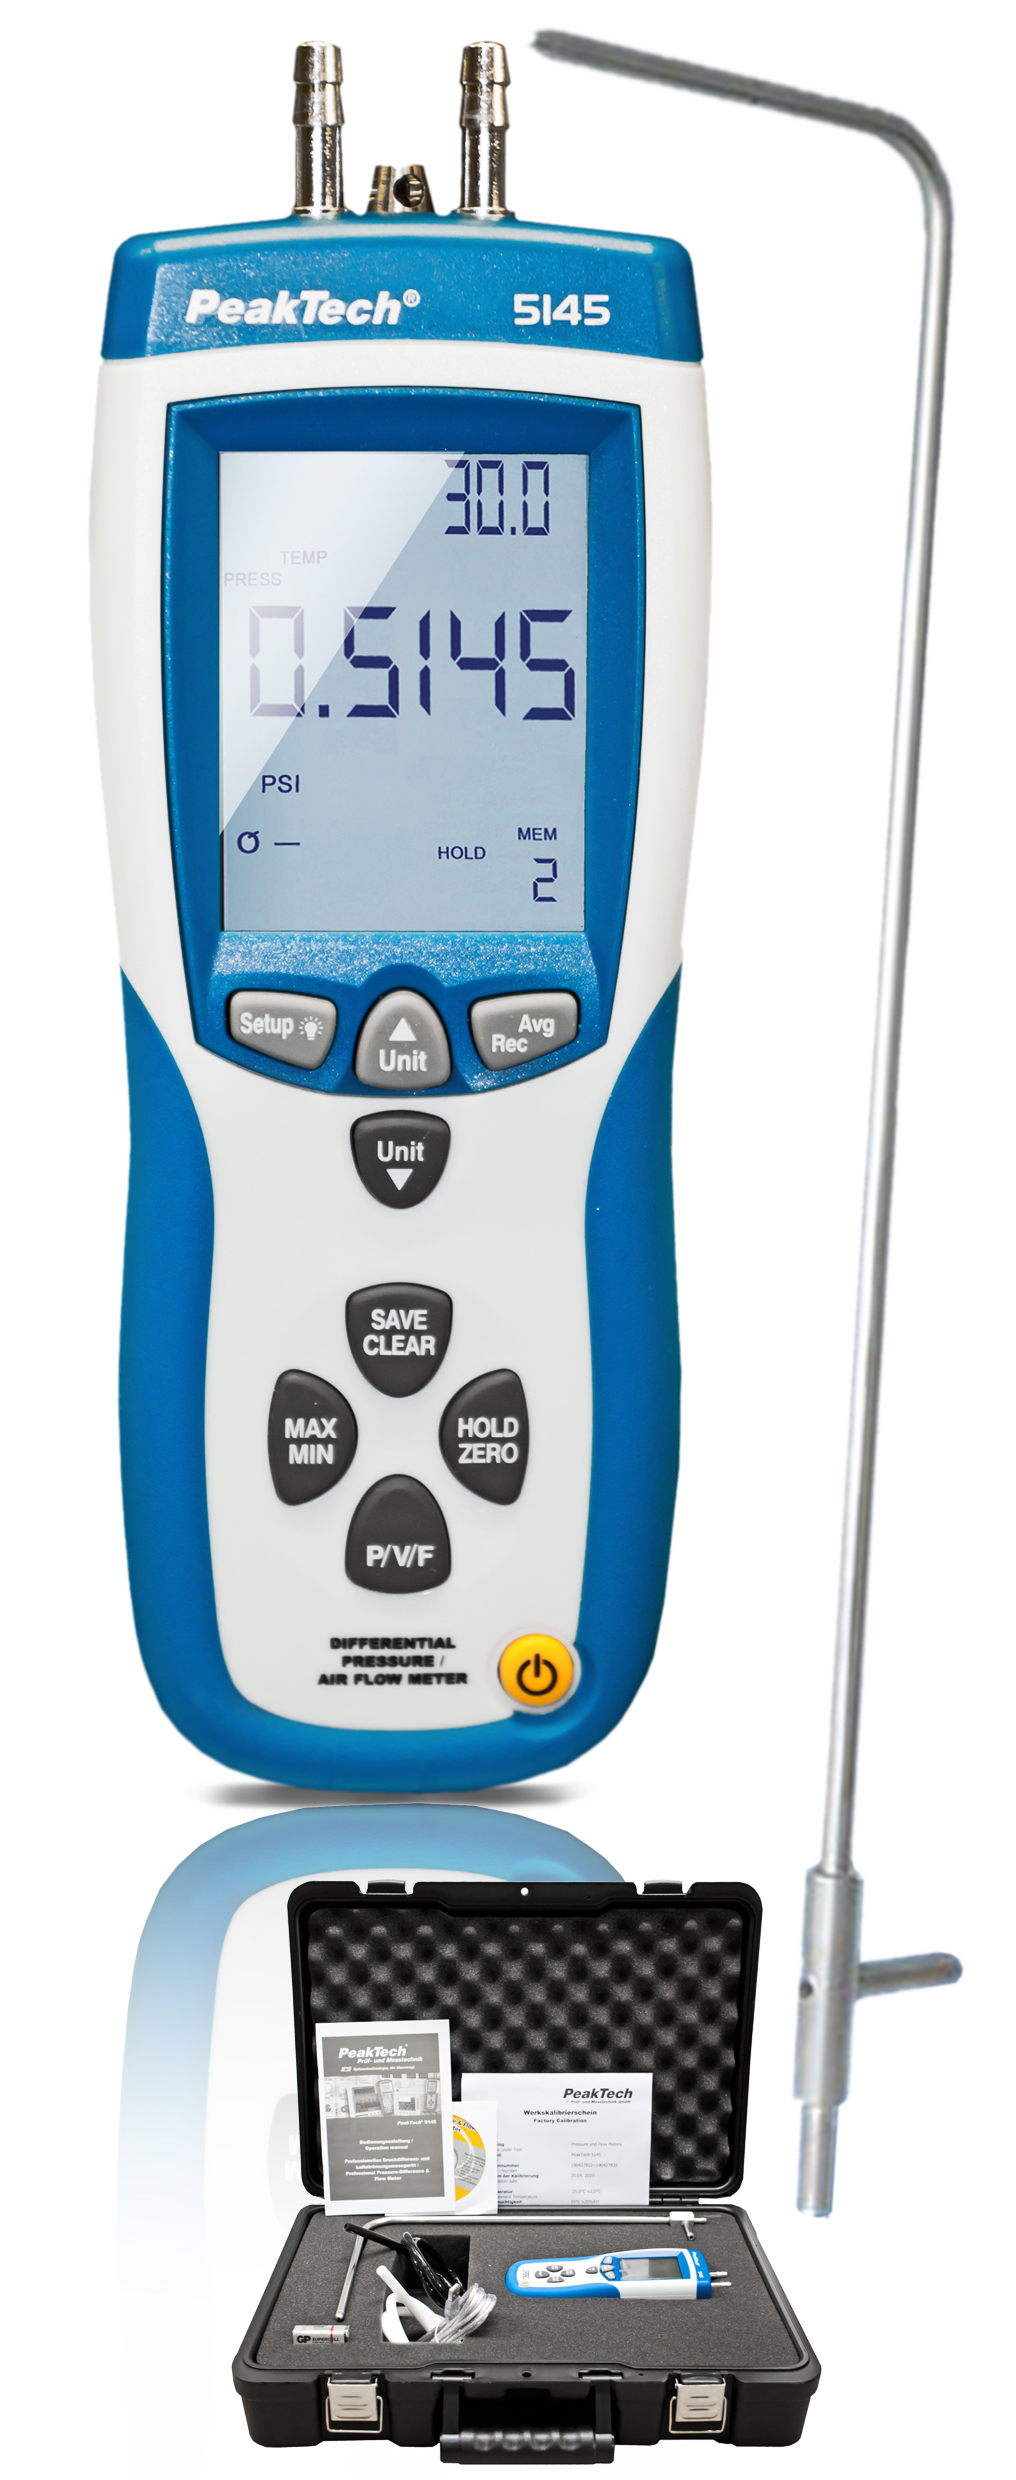 «PeakTech® P 5145» Professional Pressure-Difference & Air Flow Meter